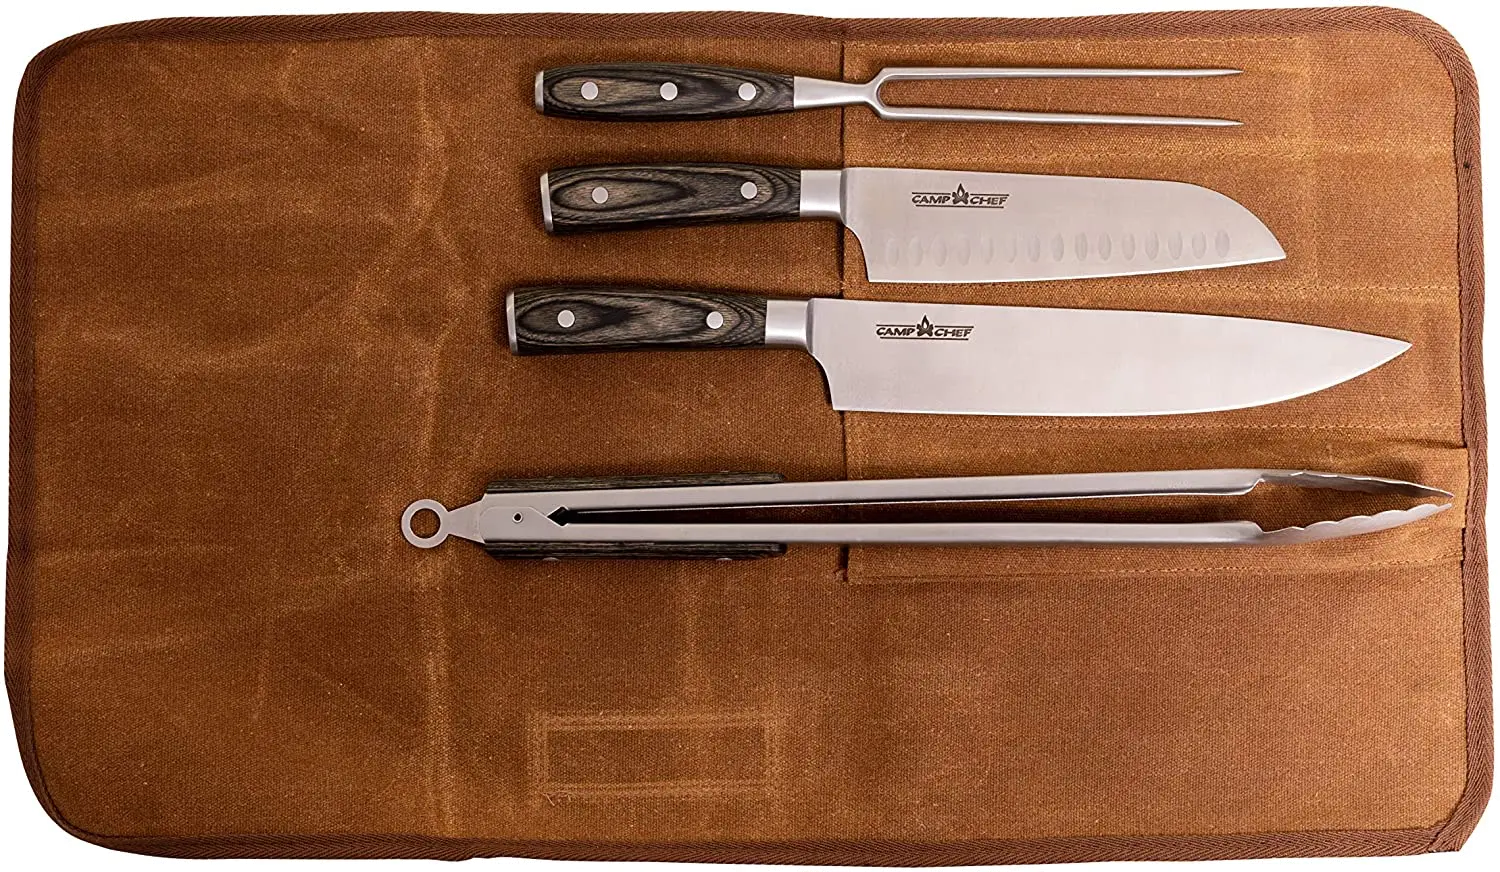 Camp Chef Deluxe Carving 4 Piece Knife Set